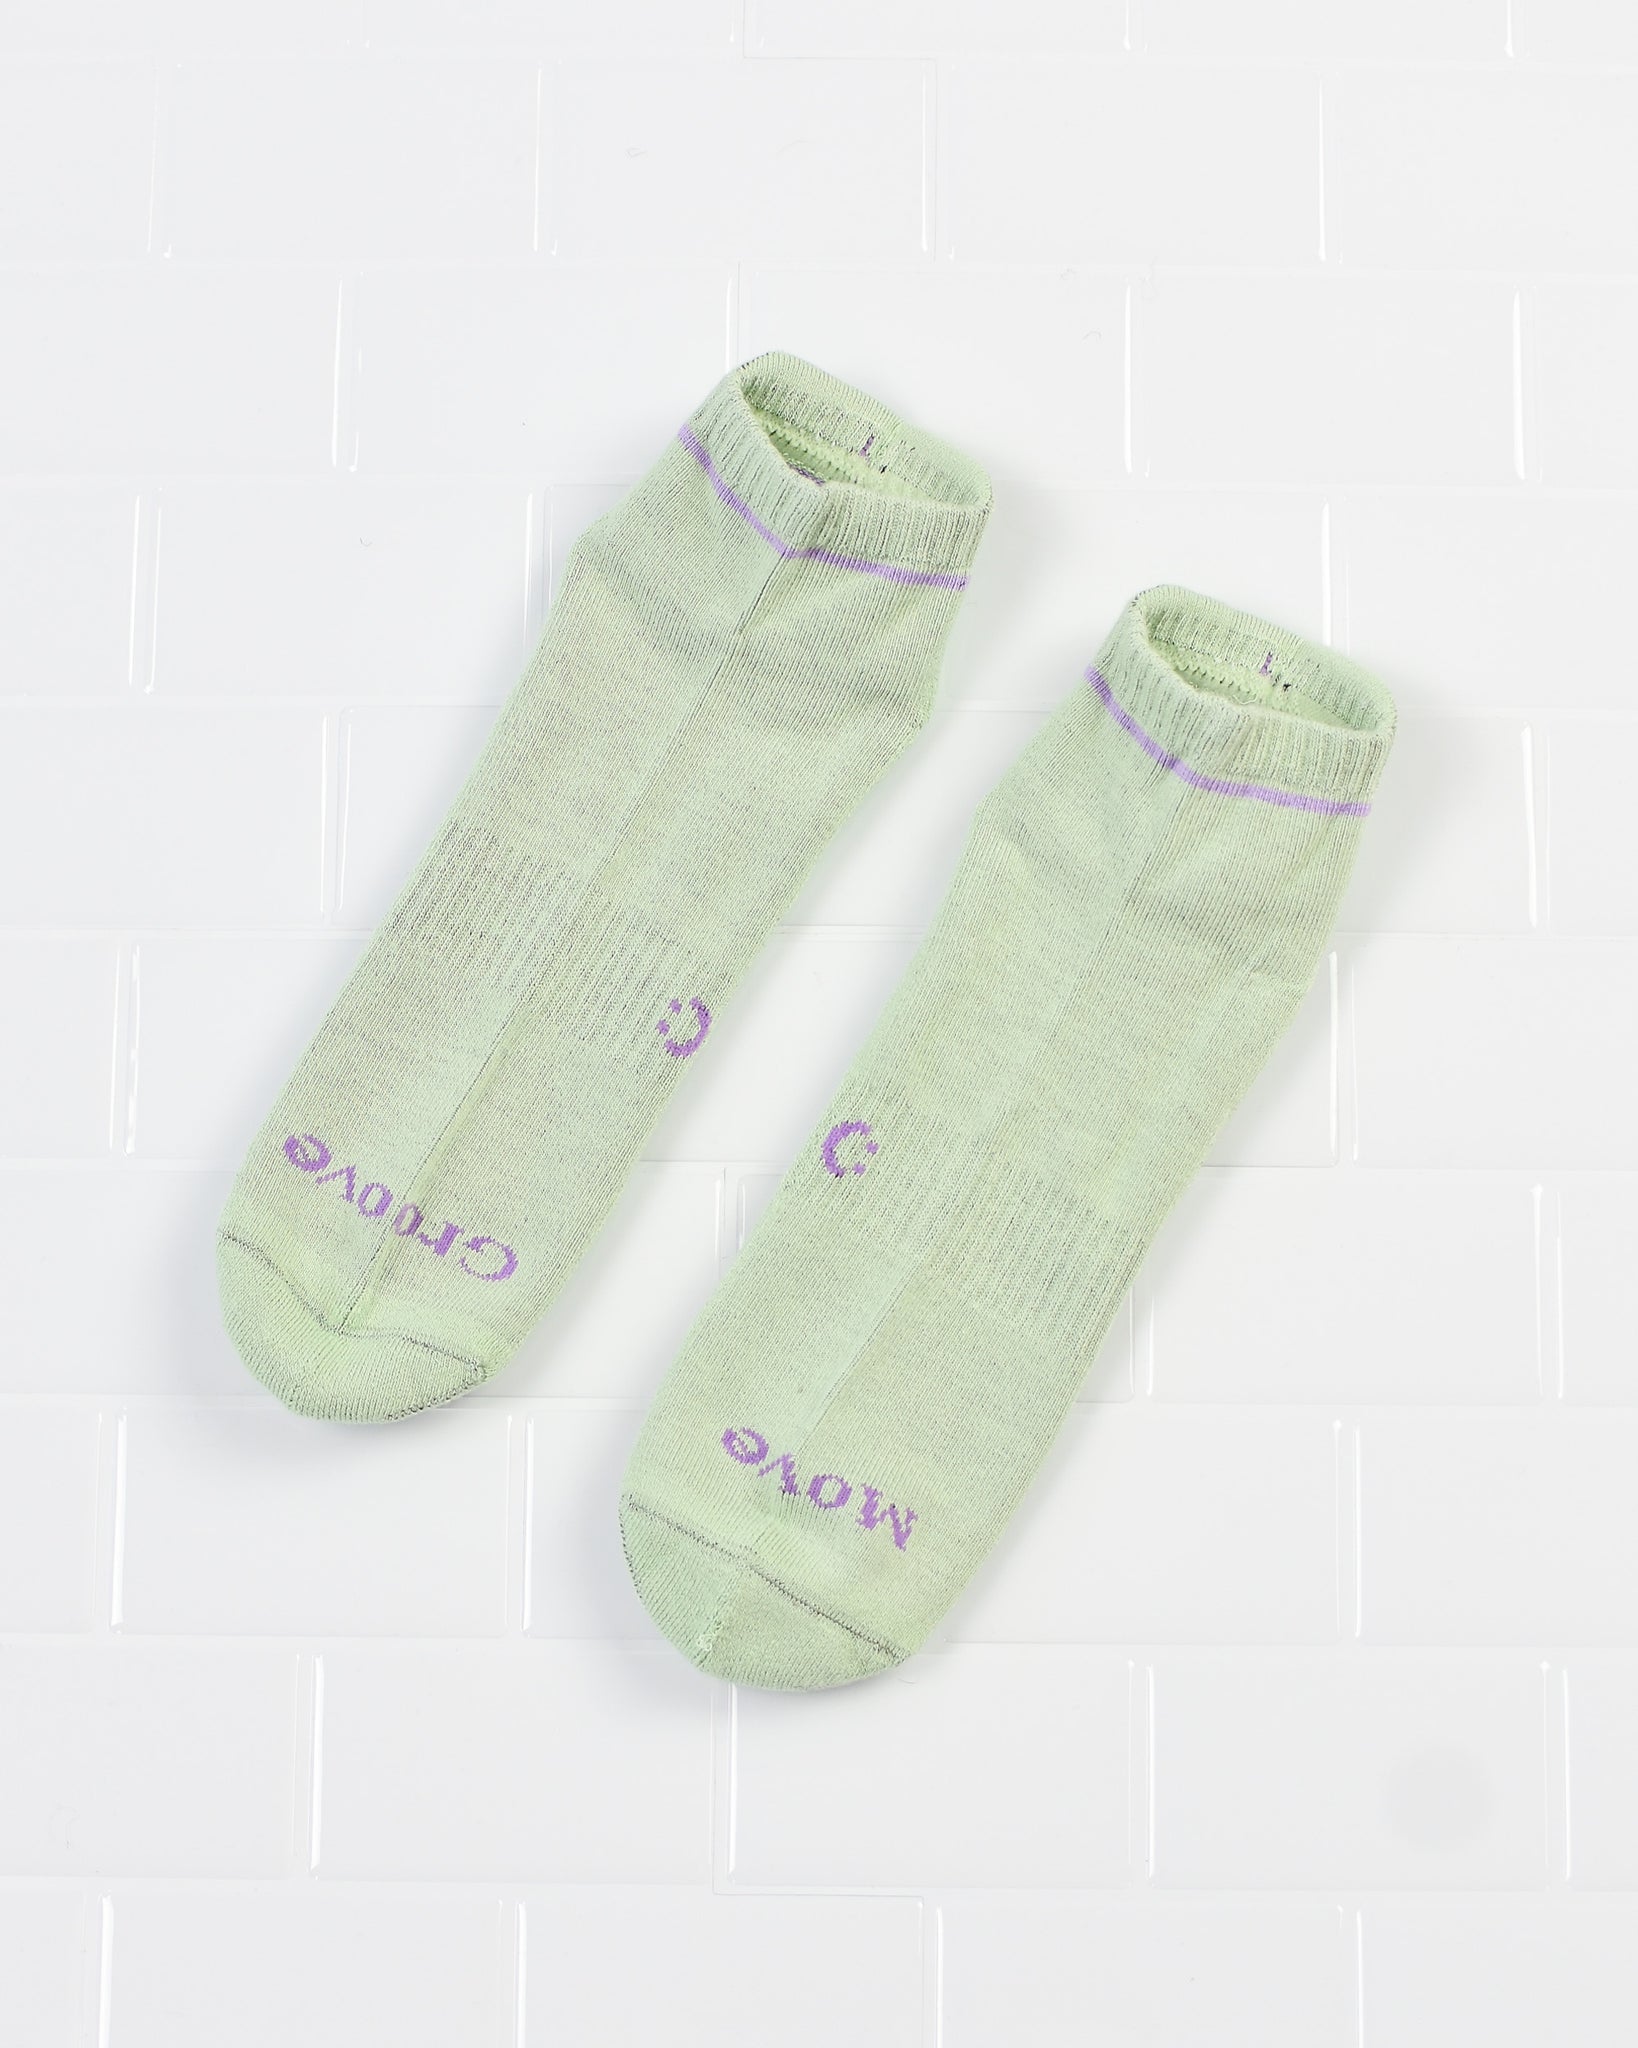 Grip Ankle Seamless Feel Sock (Adults) - Sage